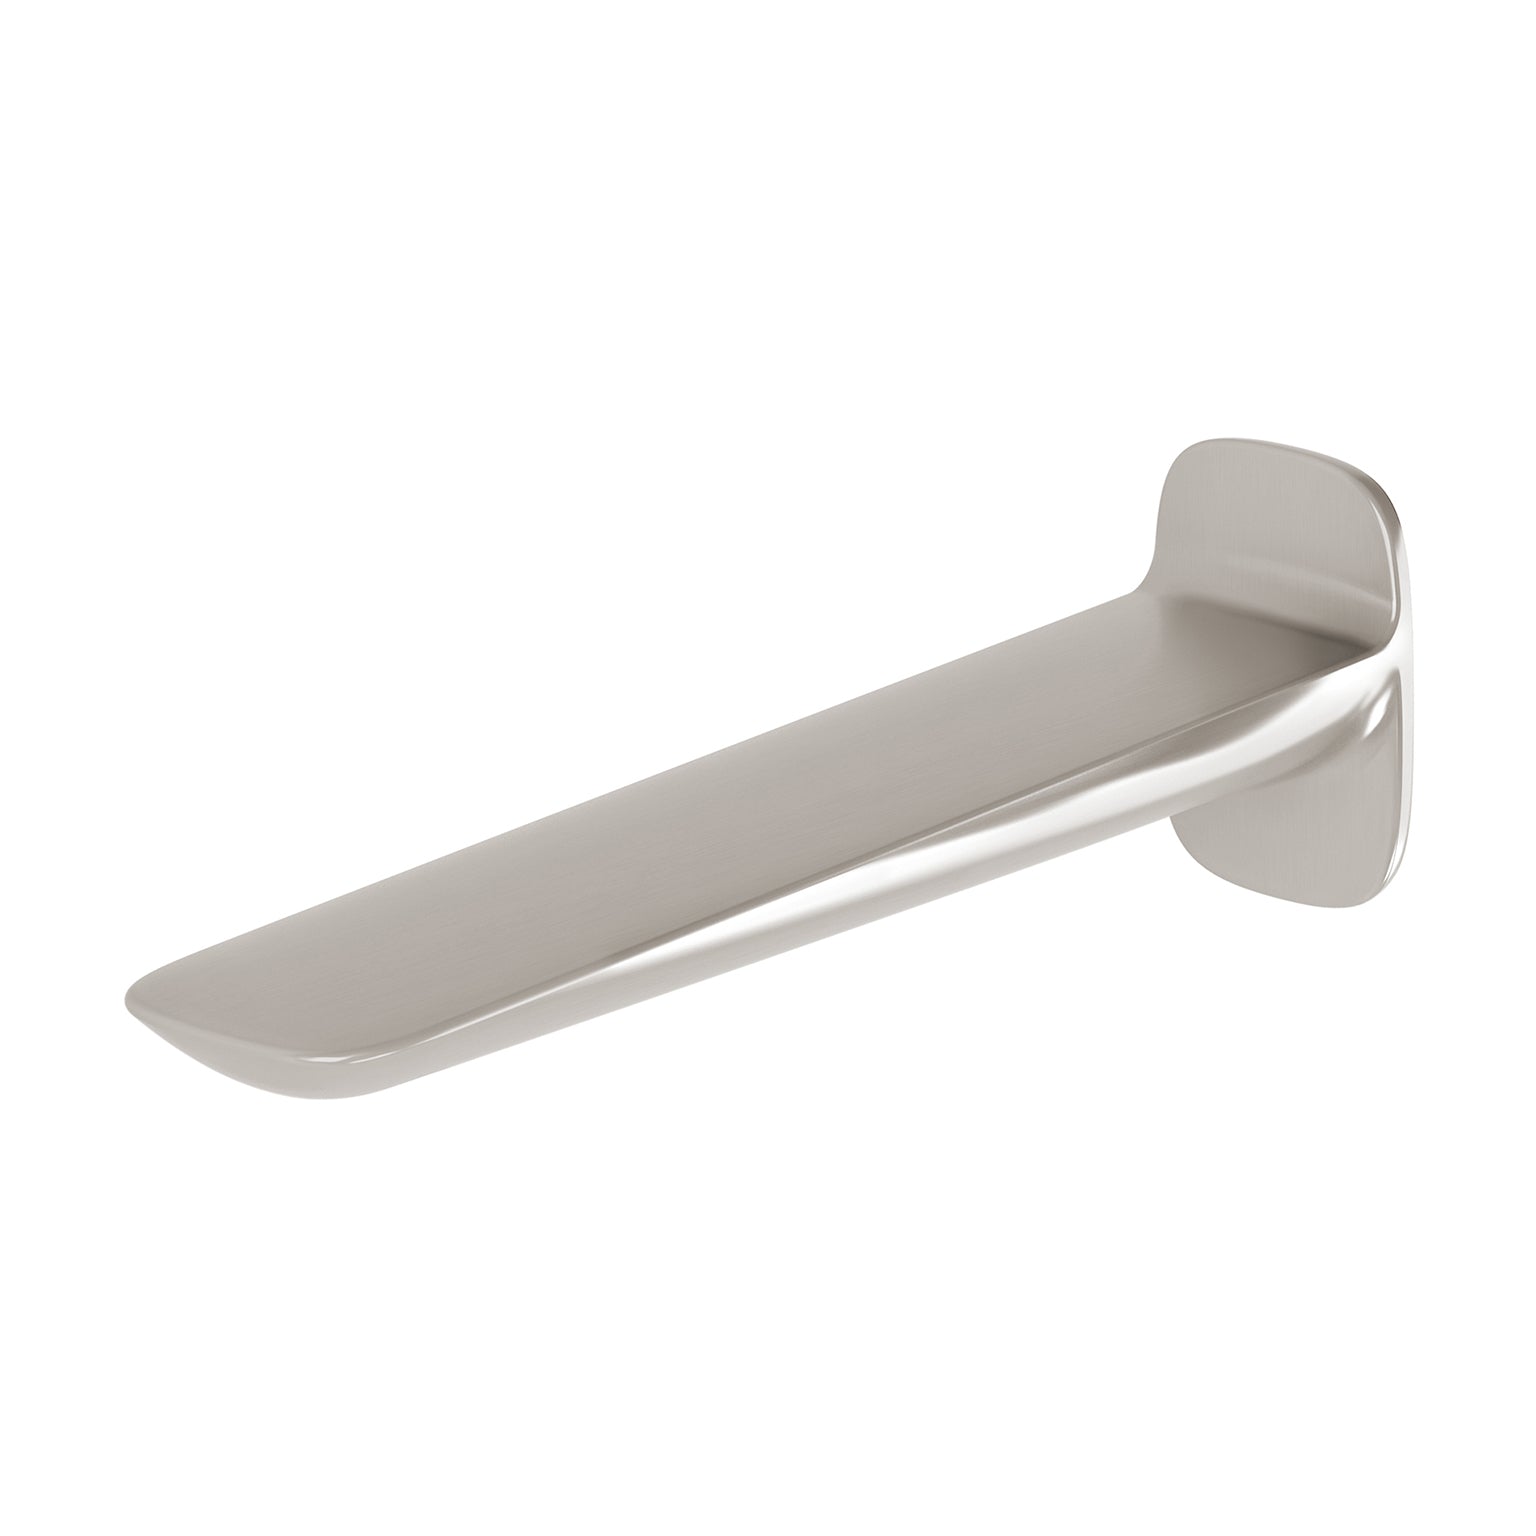 PHOENIX NUAGE WALL BASIN / BATH OUTLET 200MM BRUSHED NICKEL